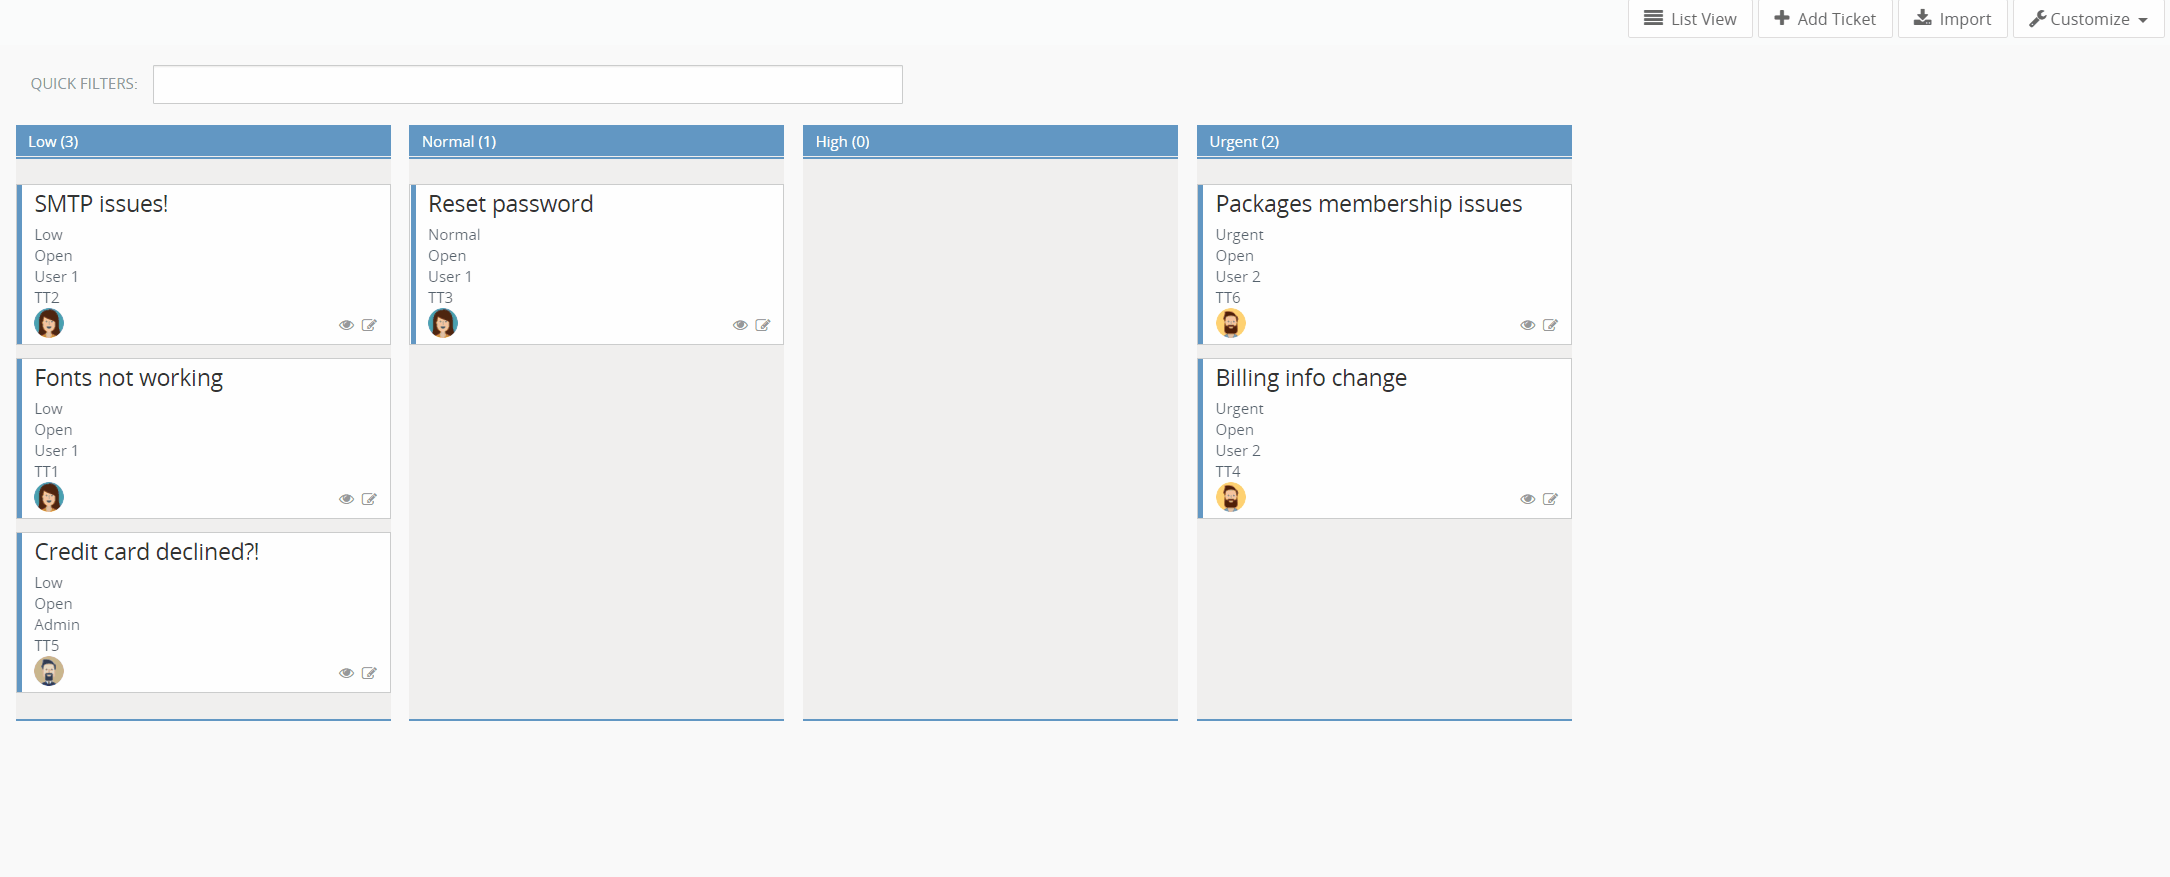 Kanban view for Vtriger CRM tickets